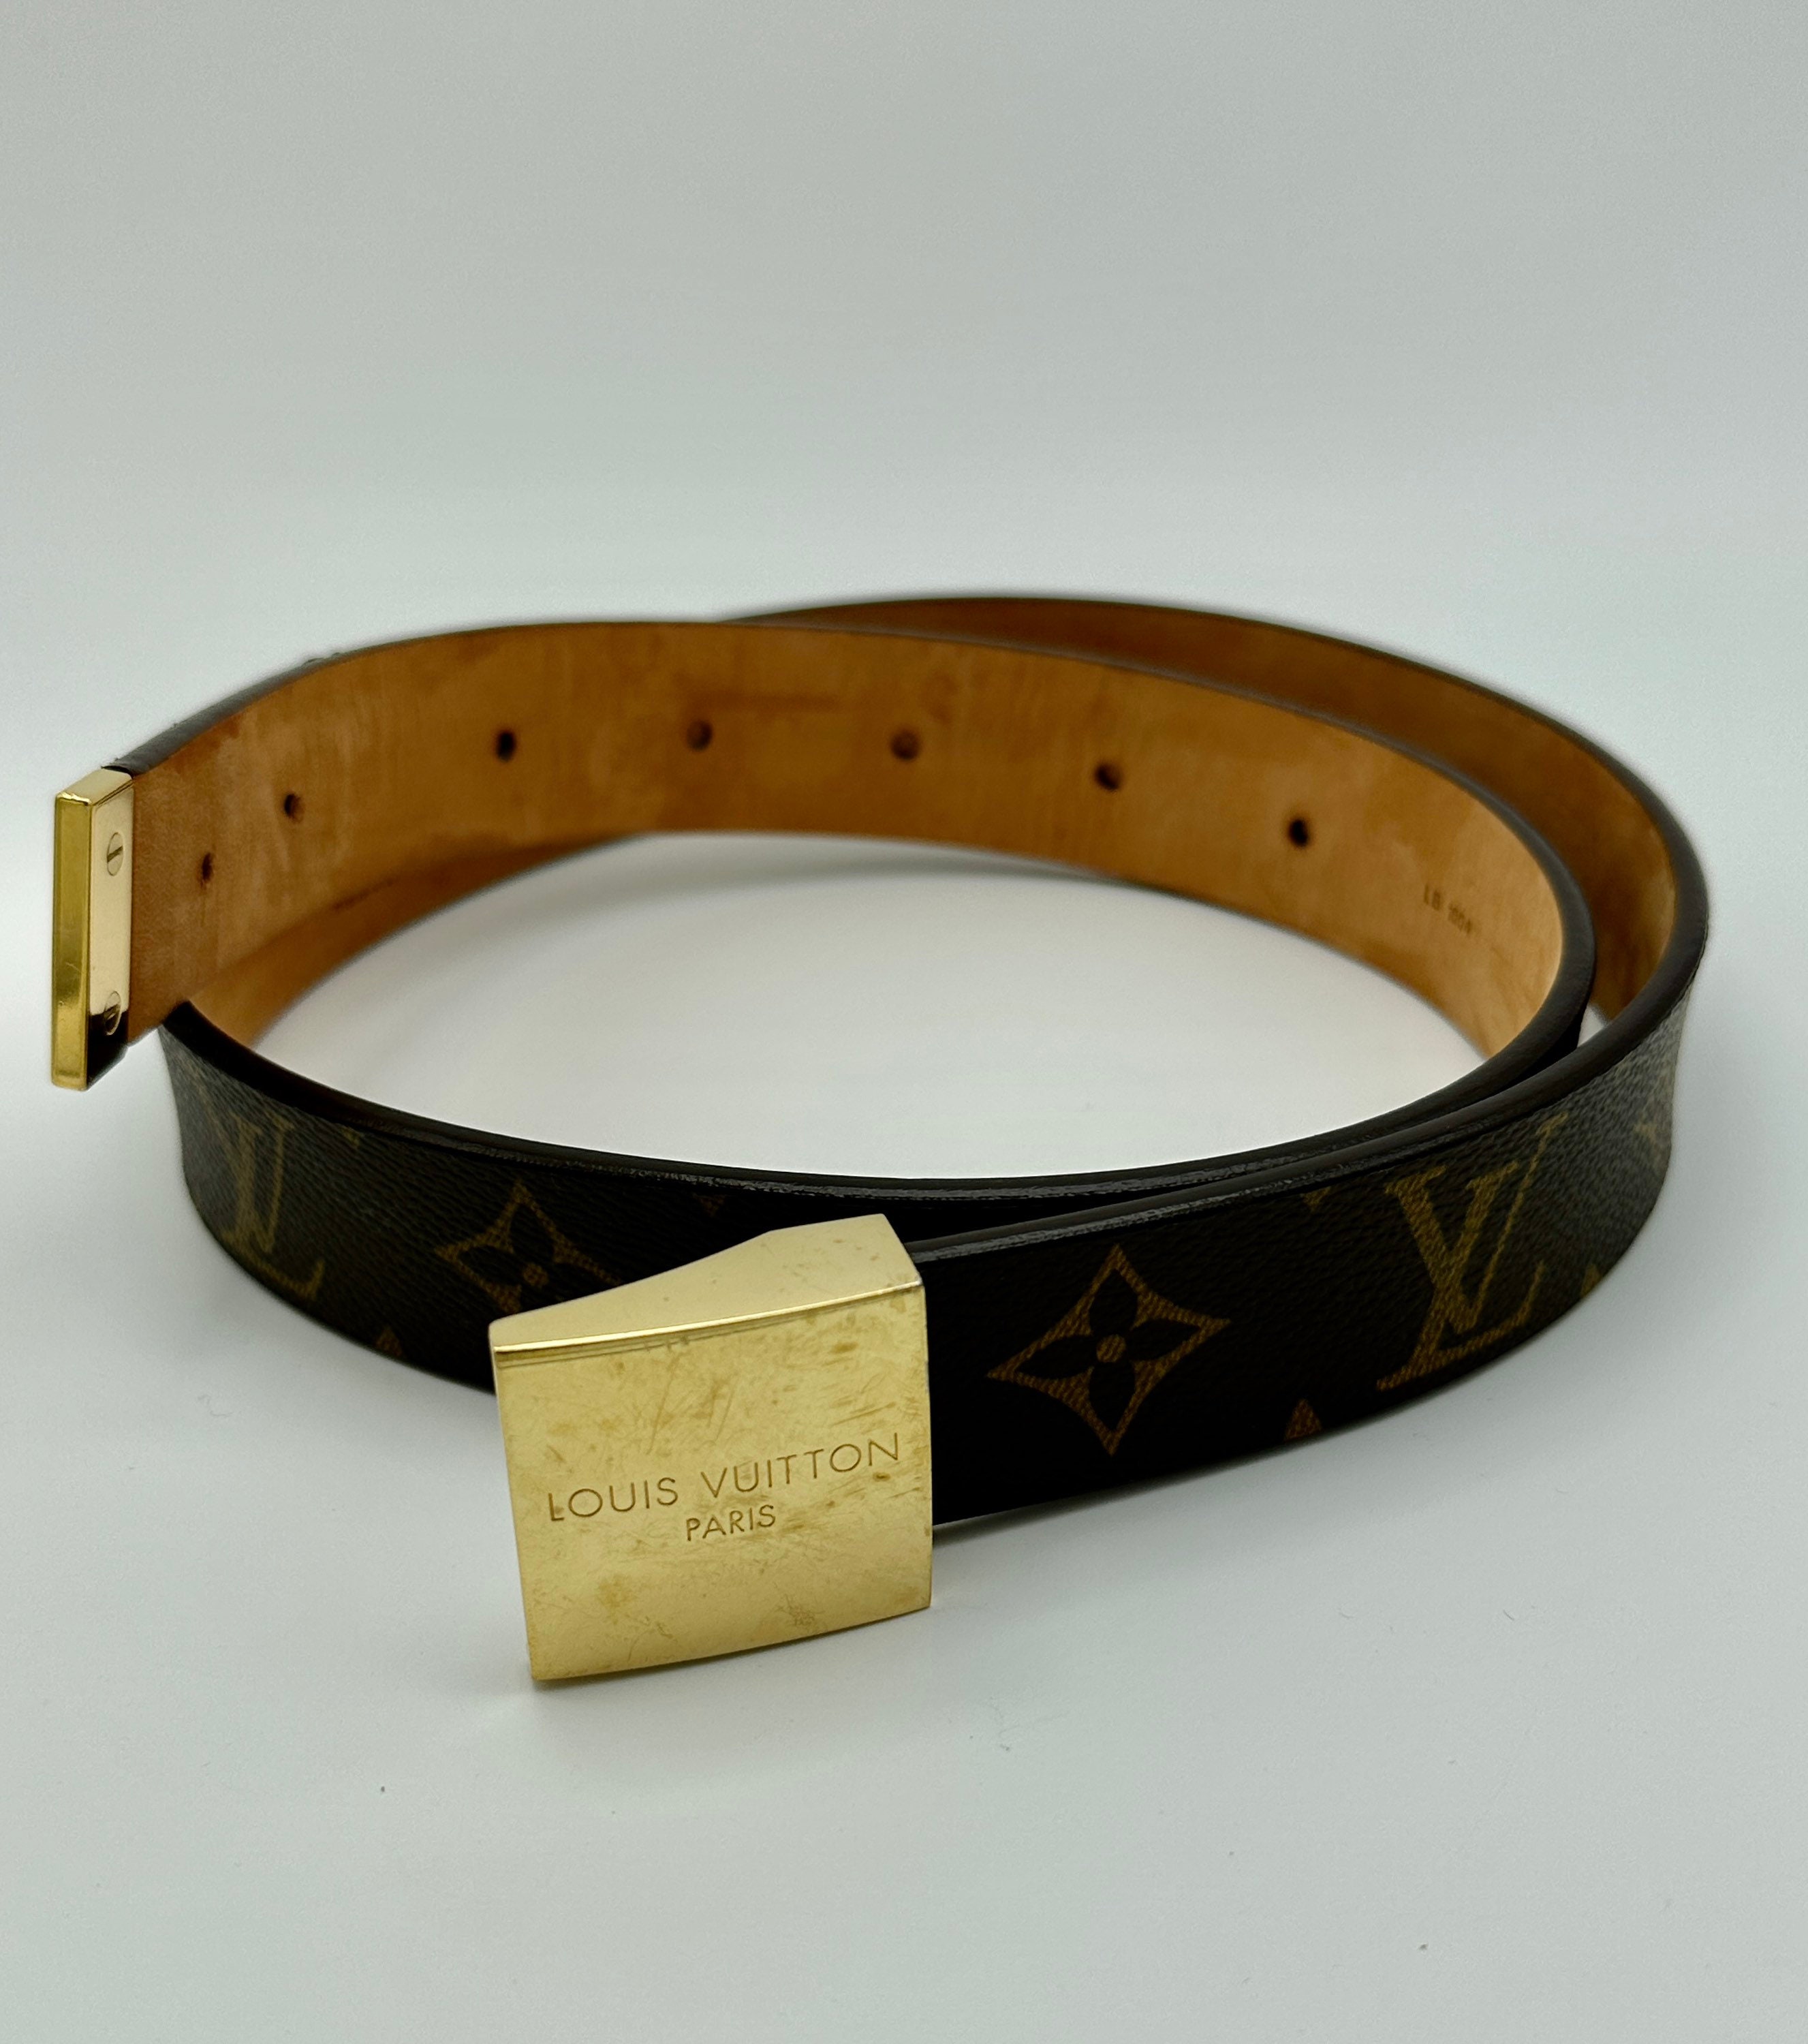 Louis Vuitton - Authenticated LV Circle Belt - Leather Gold for Women, Good Condition